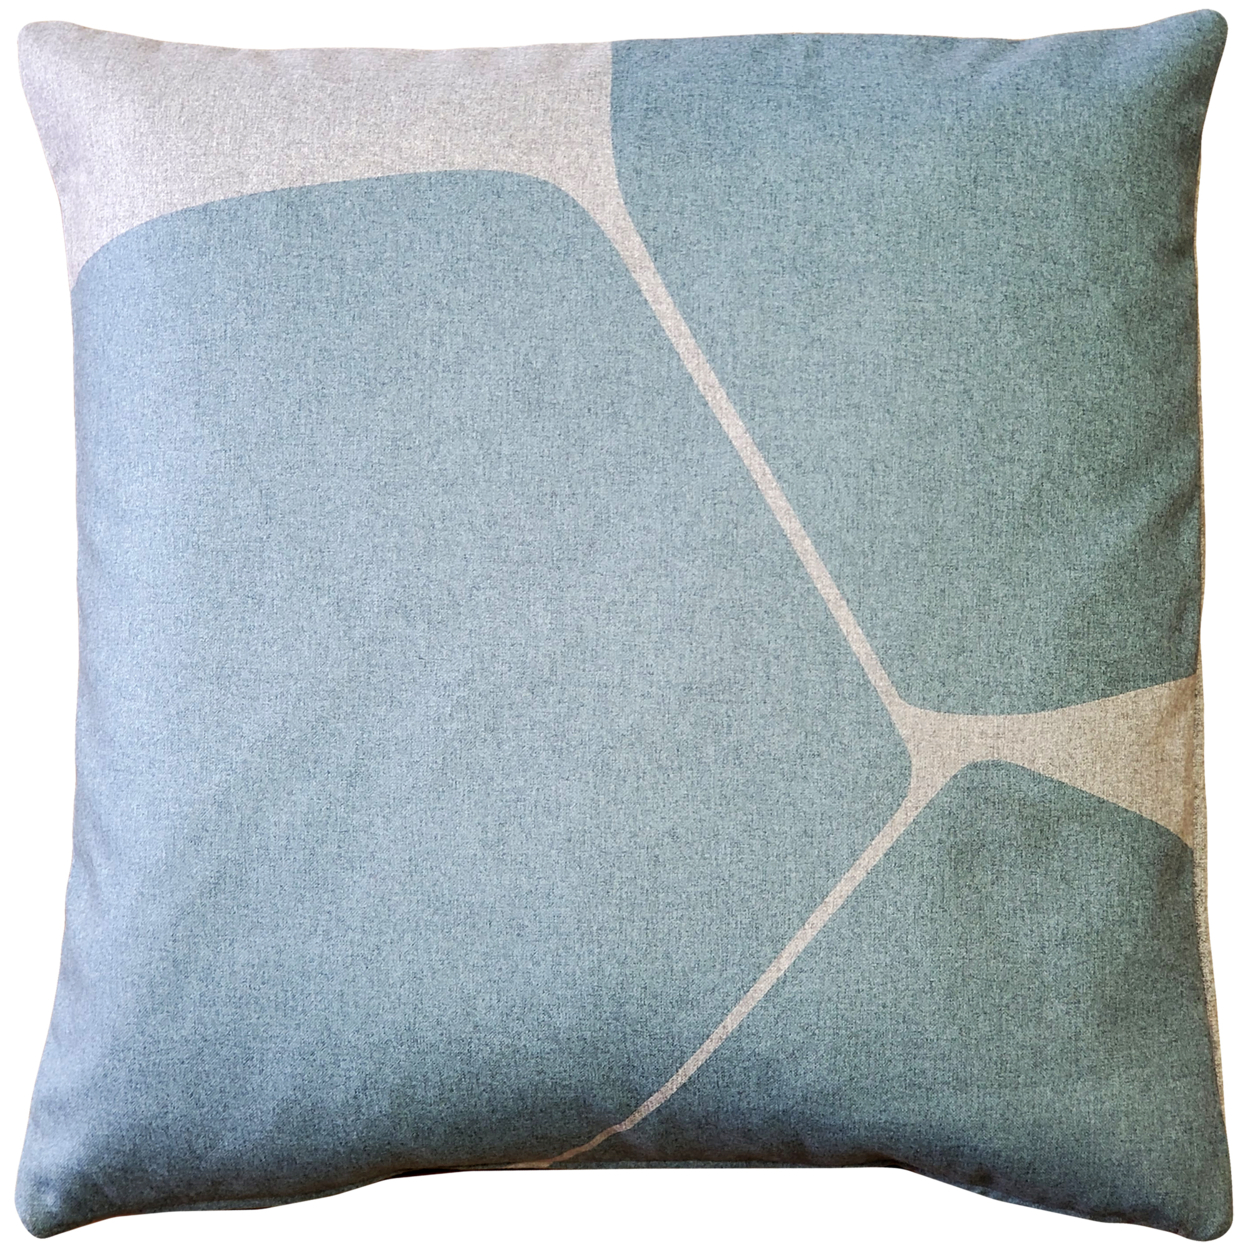 Aurora Paradiso Blue Throw Pillow 19x19 Inches Square, Complete Pillow with Polyfill Pillow Insert